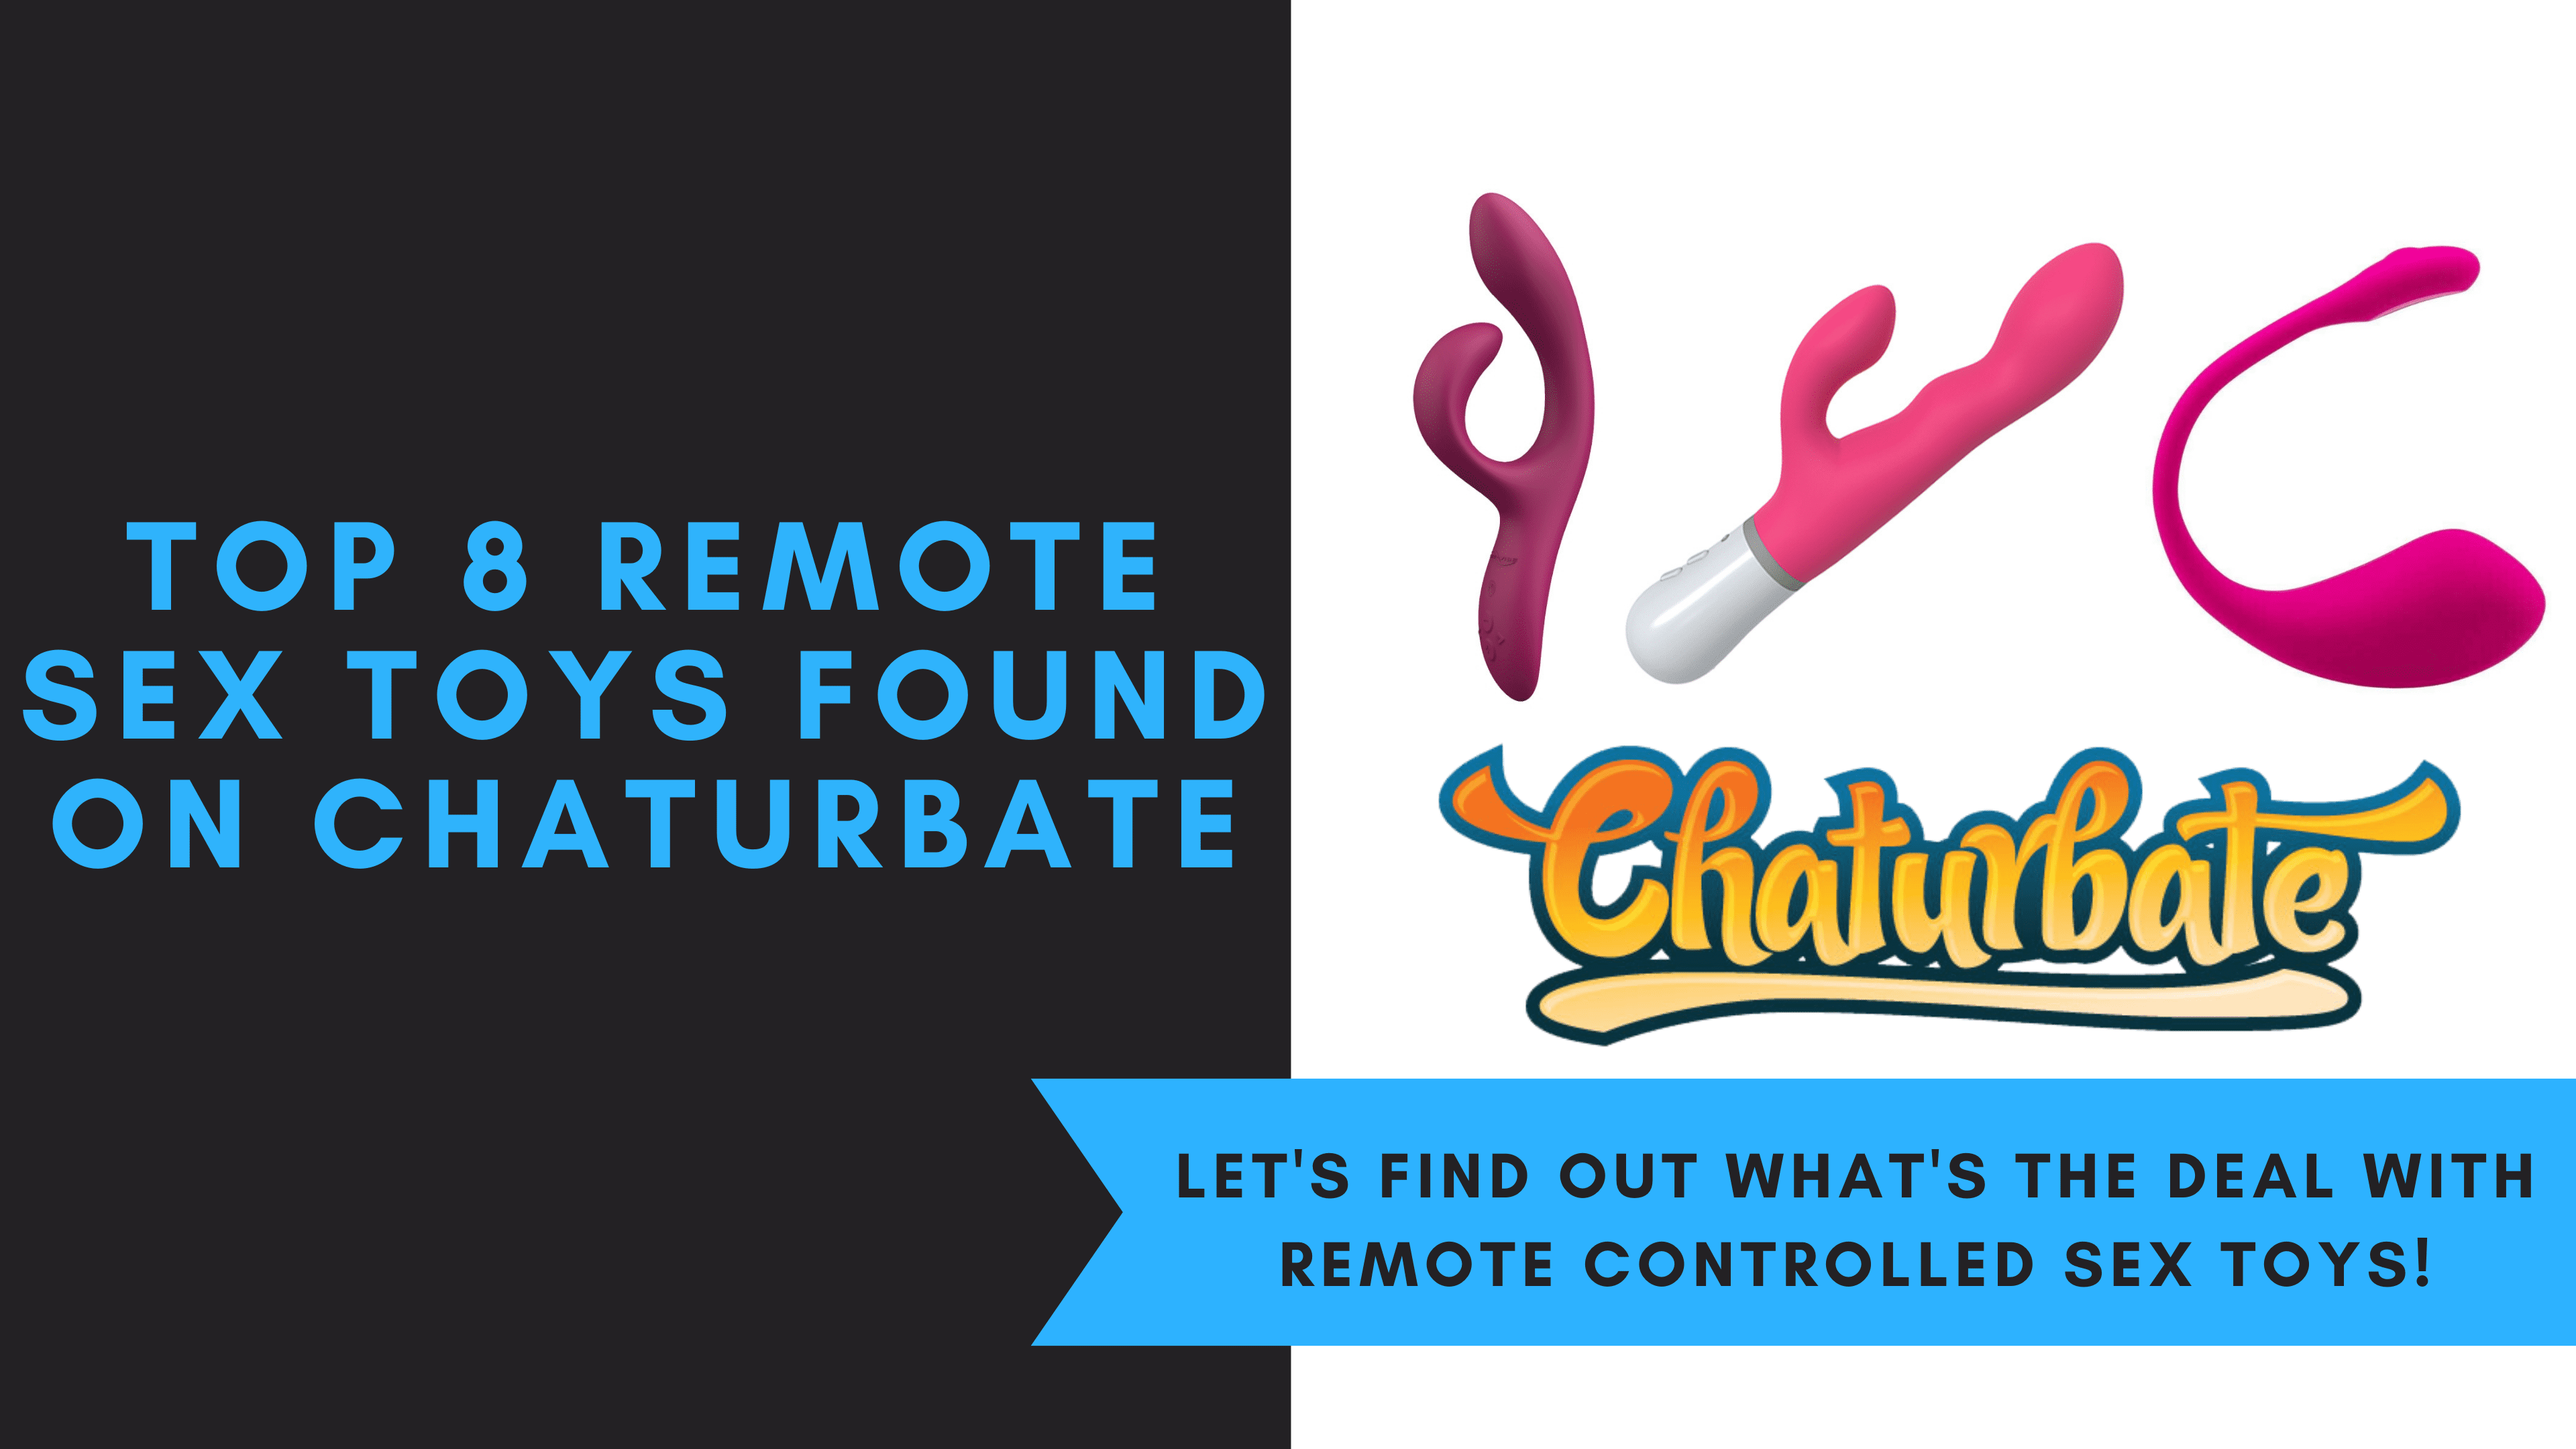 Top 8 Remote Sex Toys Found On Chaturbate